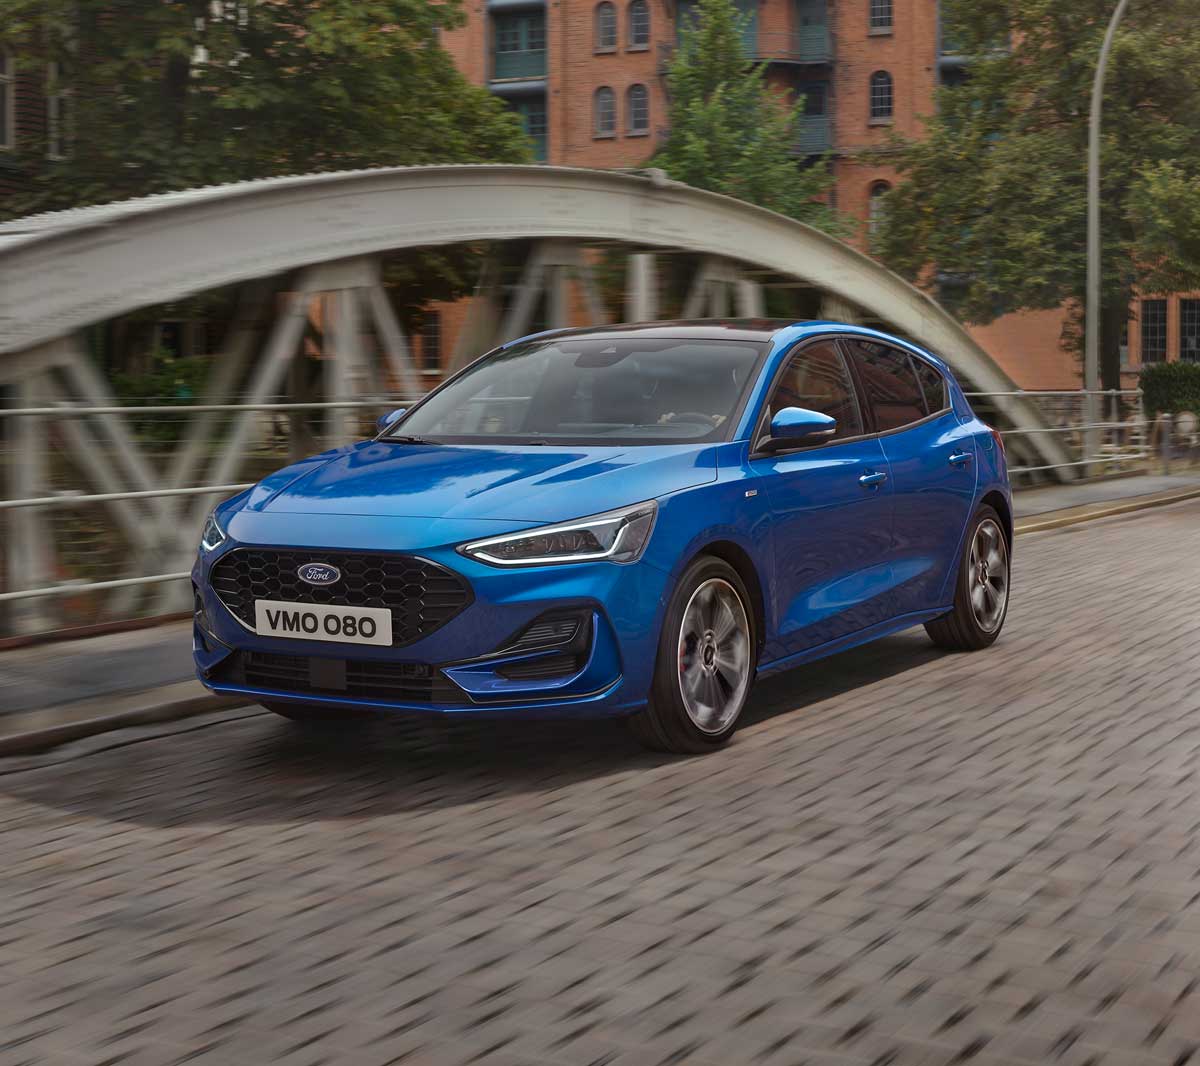 New Blue Ford Focus driving on a bridge